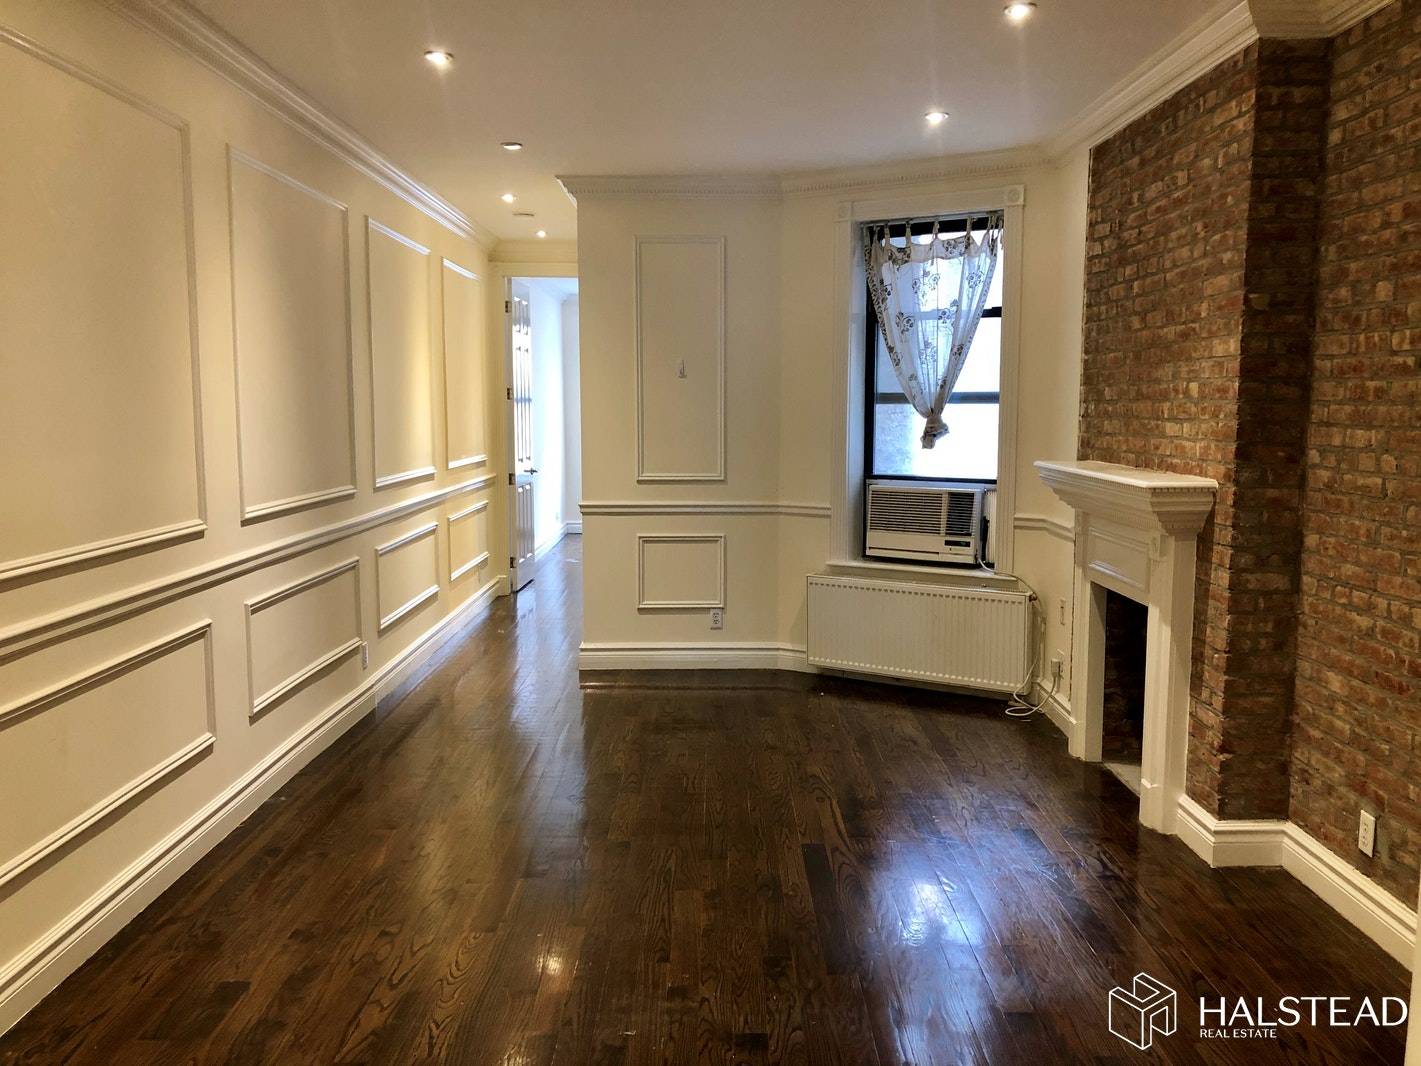 Live in this mint Brownstone 2 Bedroom 1 Bath home which has been beautifully restored with crown moldings, walnut wood floors, exposed brick, open kitchen with granite counter tops, white ...